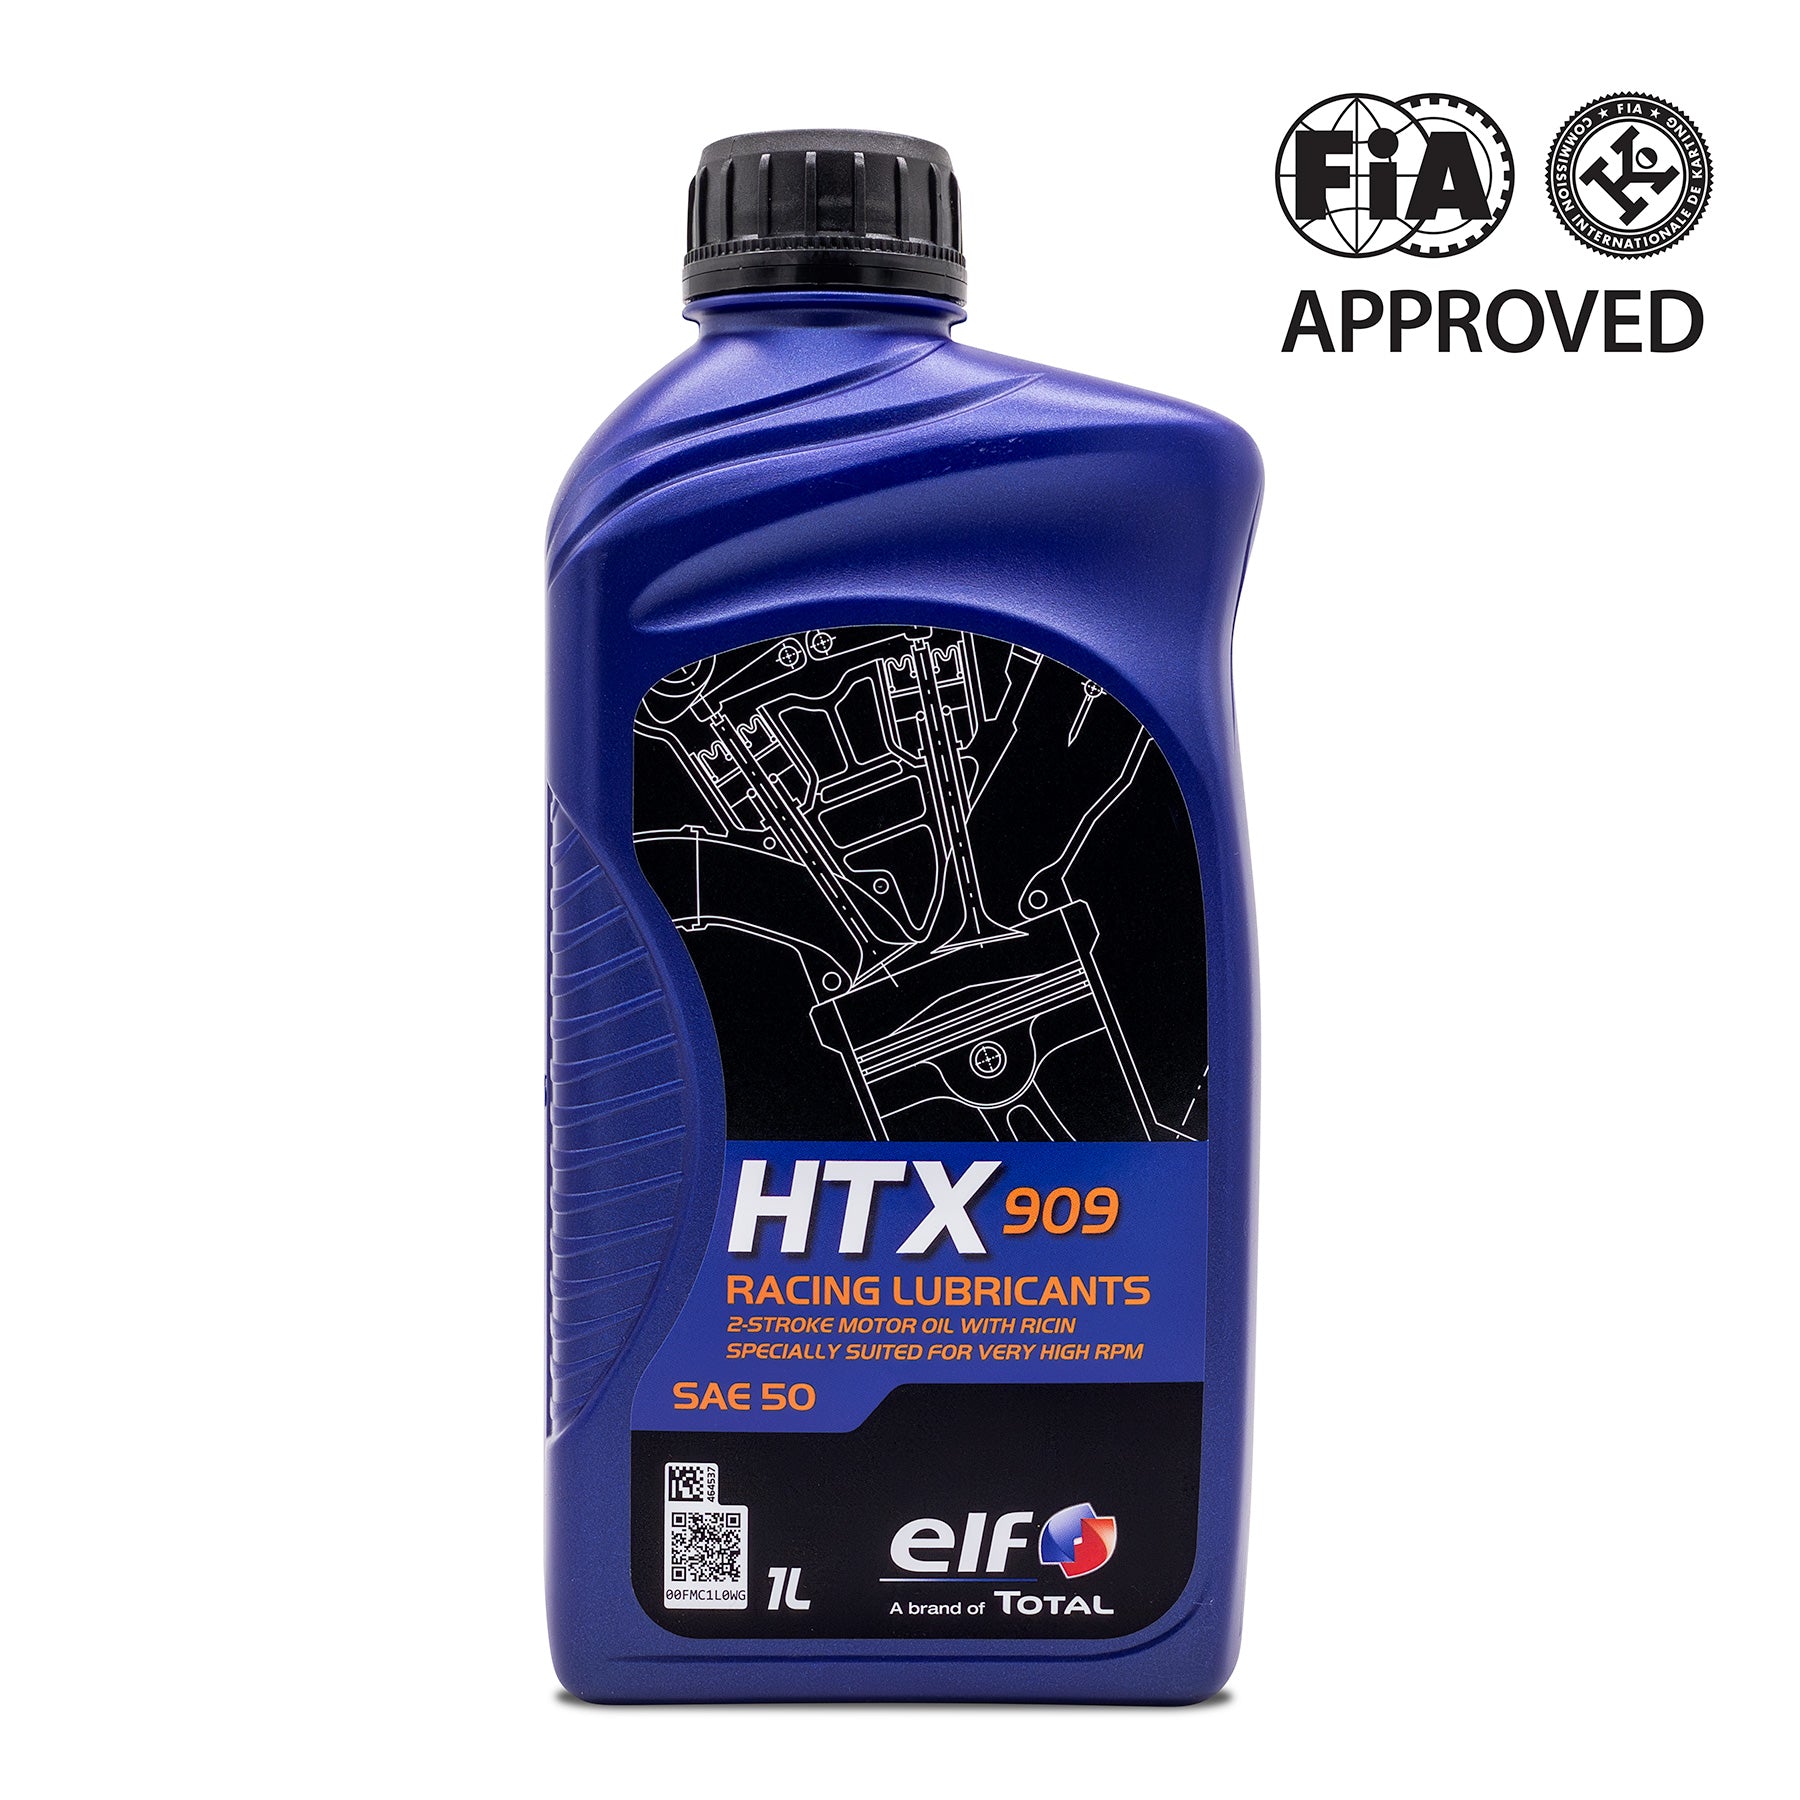 ELF HTX909 engine oil for water-cooled go karts